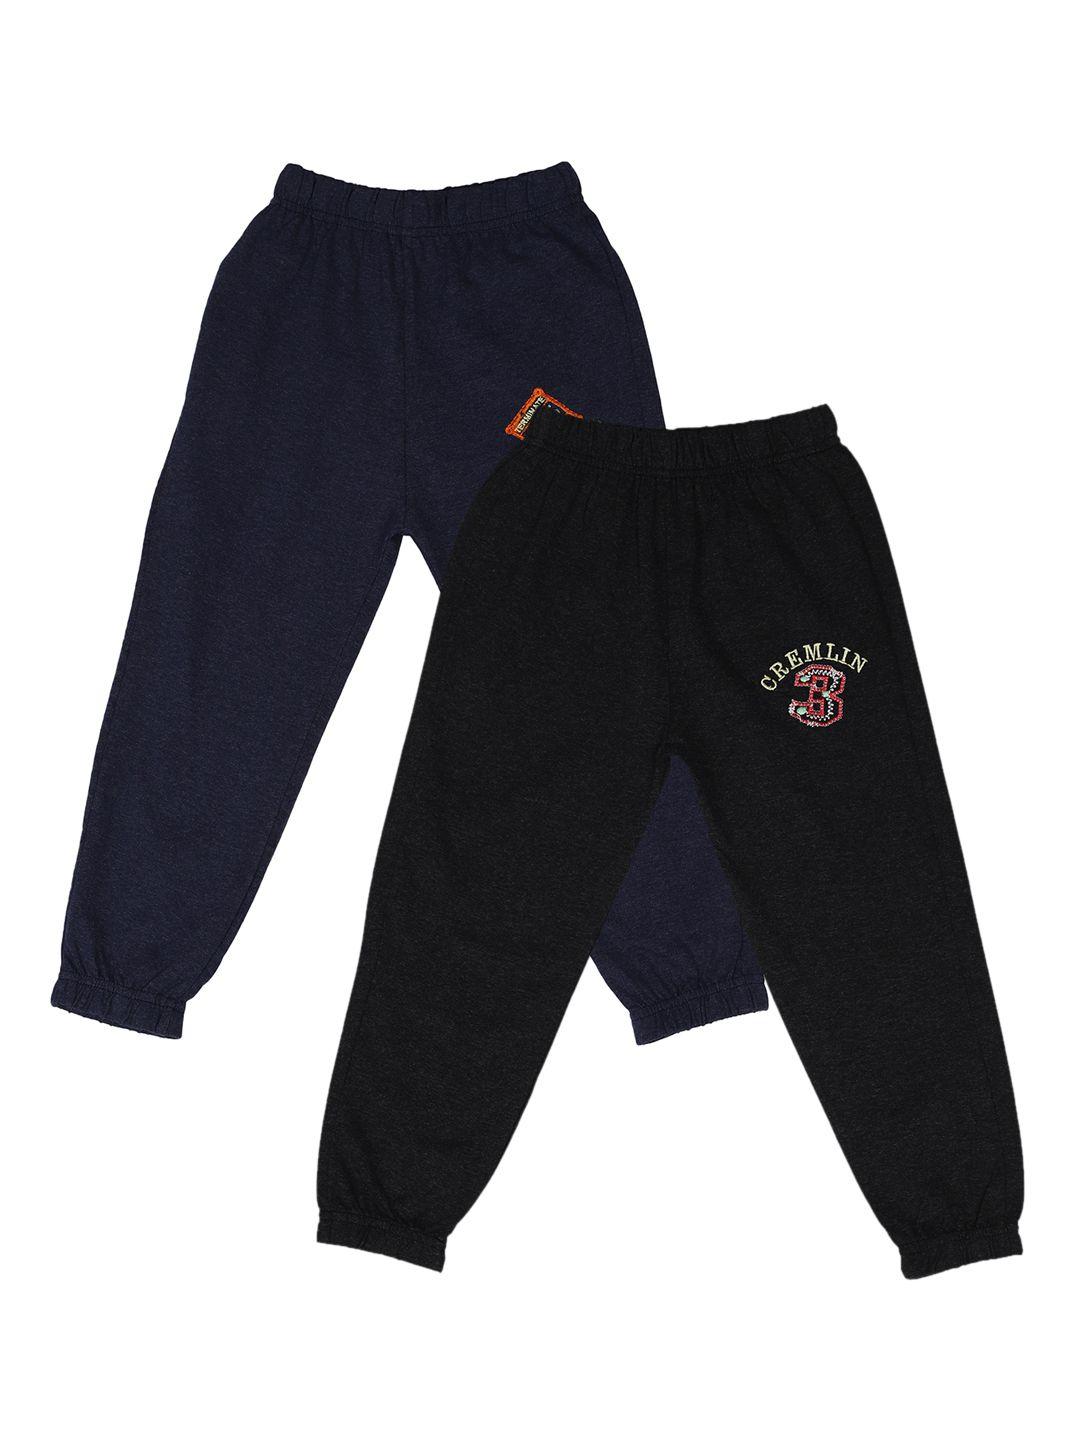 cremlin clothing kids pack of 2 black & navy blue solid joggers